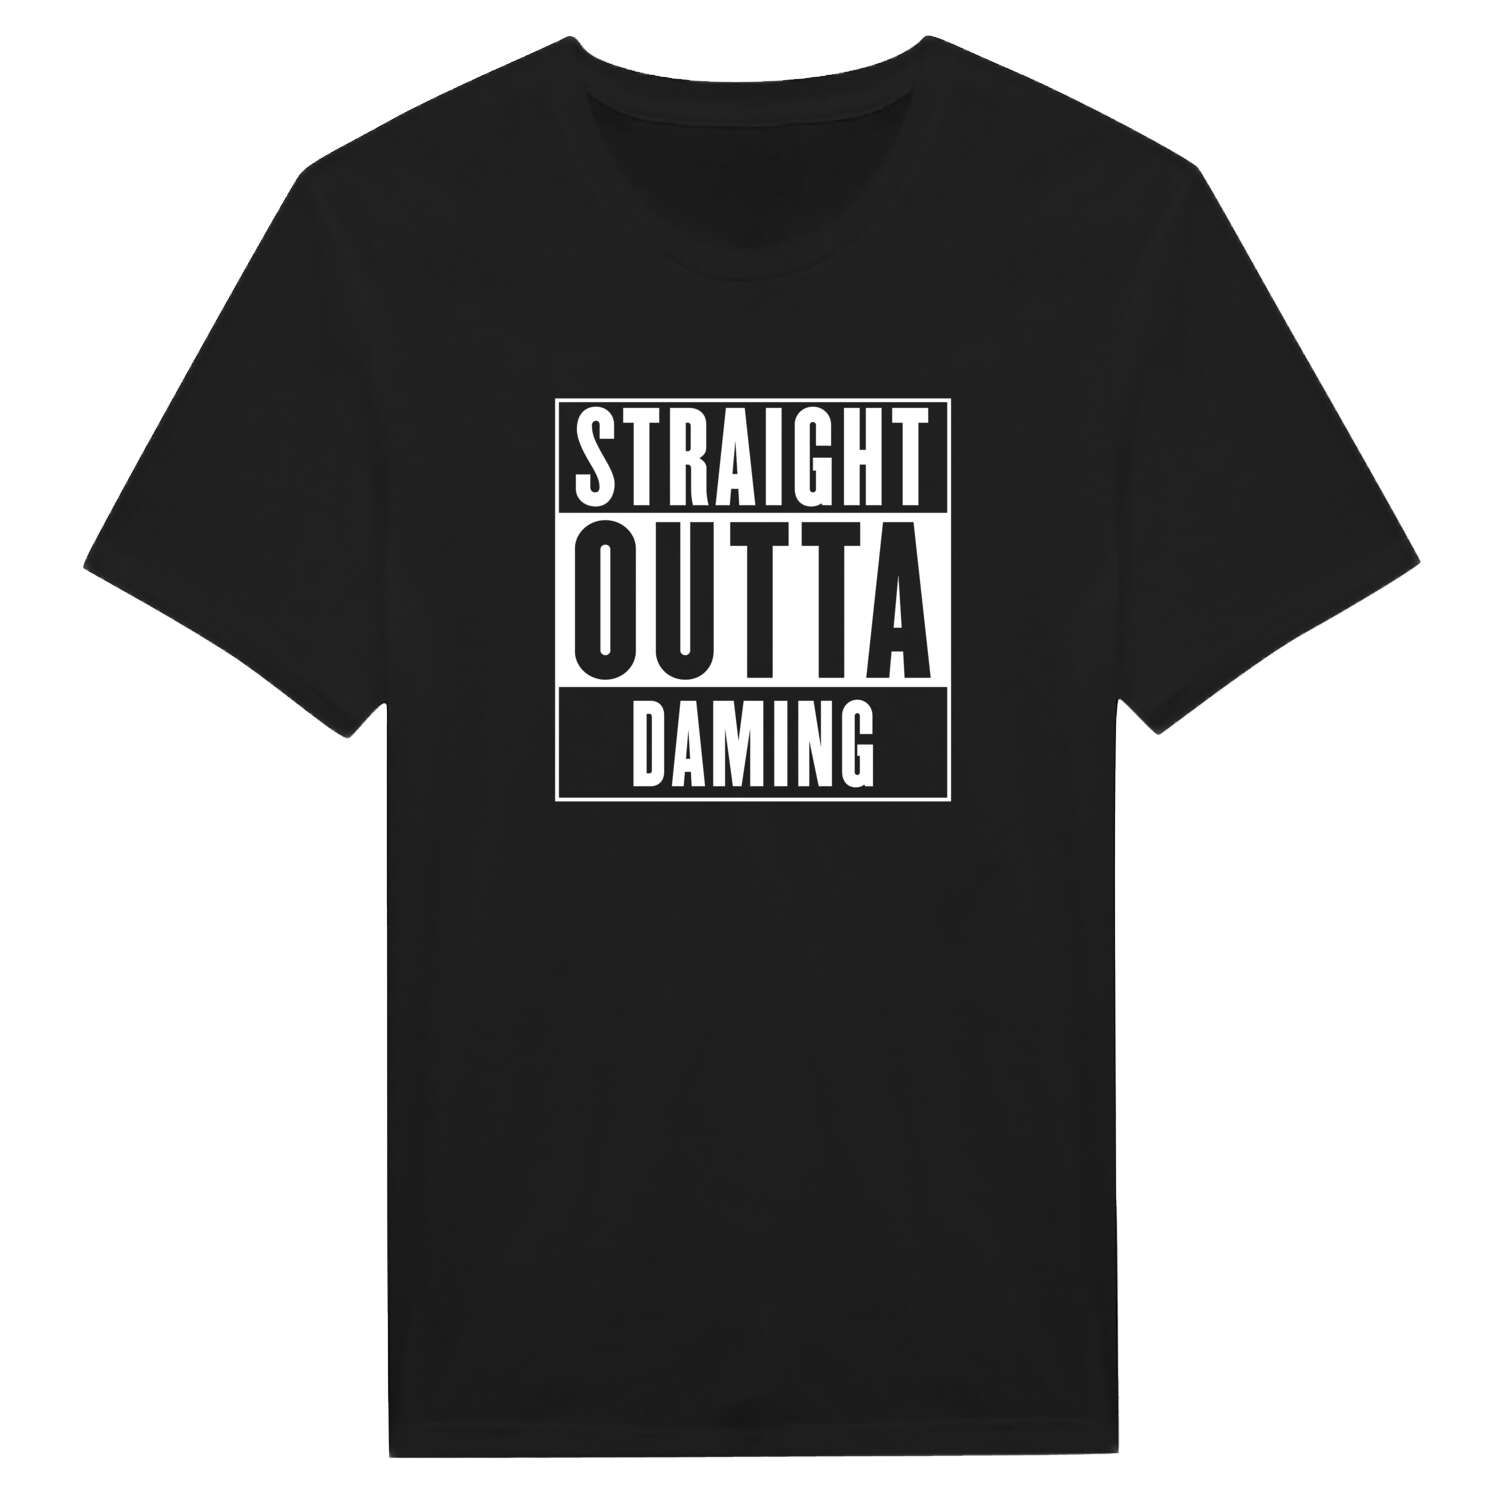 Daming T-Shirt »Straight Outta«